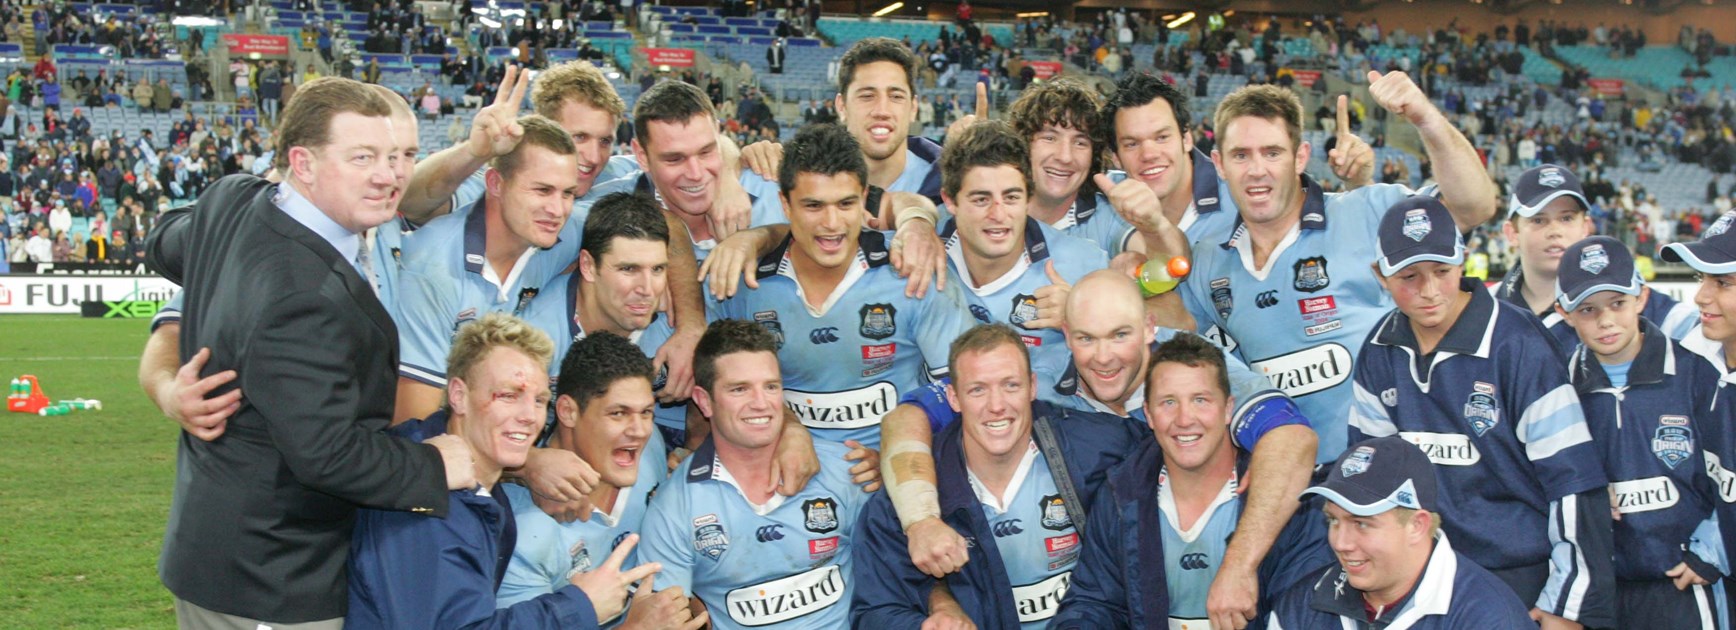 NSW celebrate after getting their hands on the 2004 State of Origin shield.